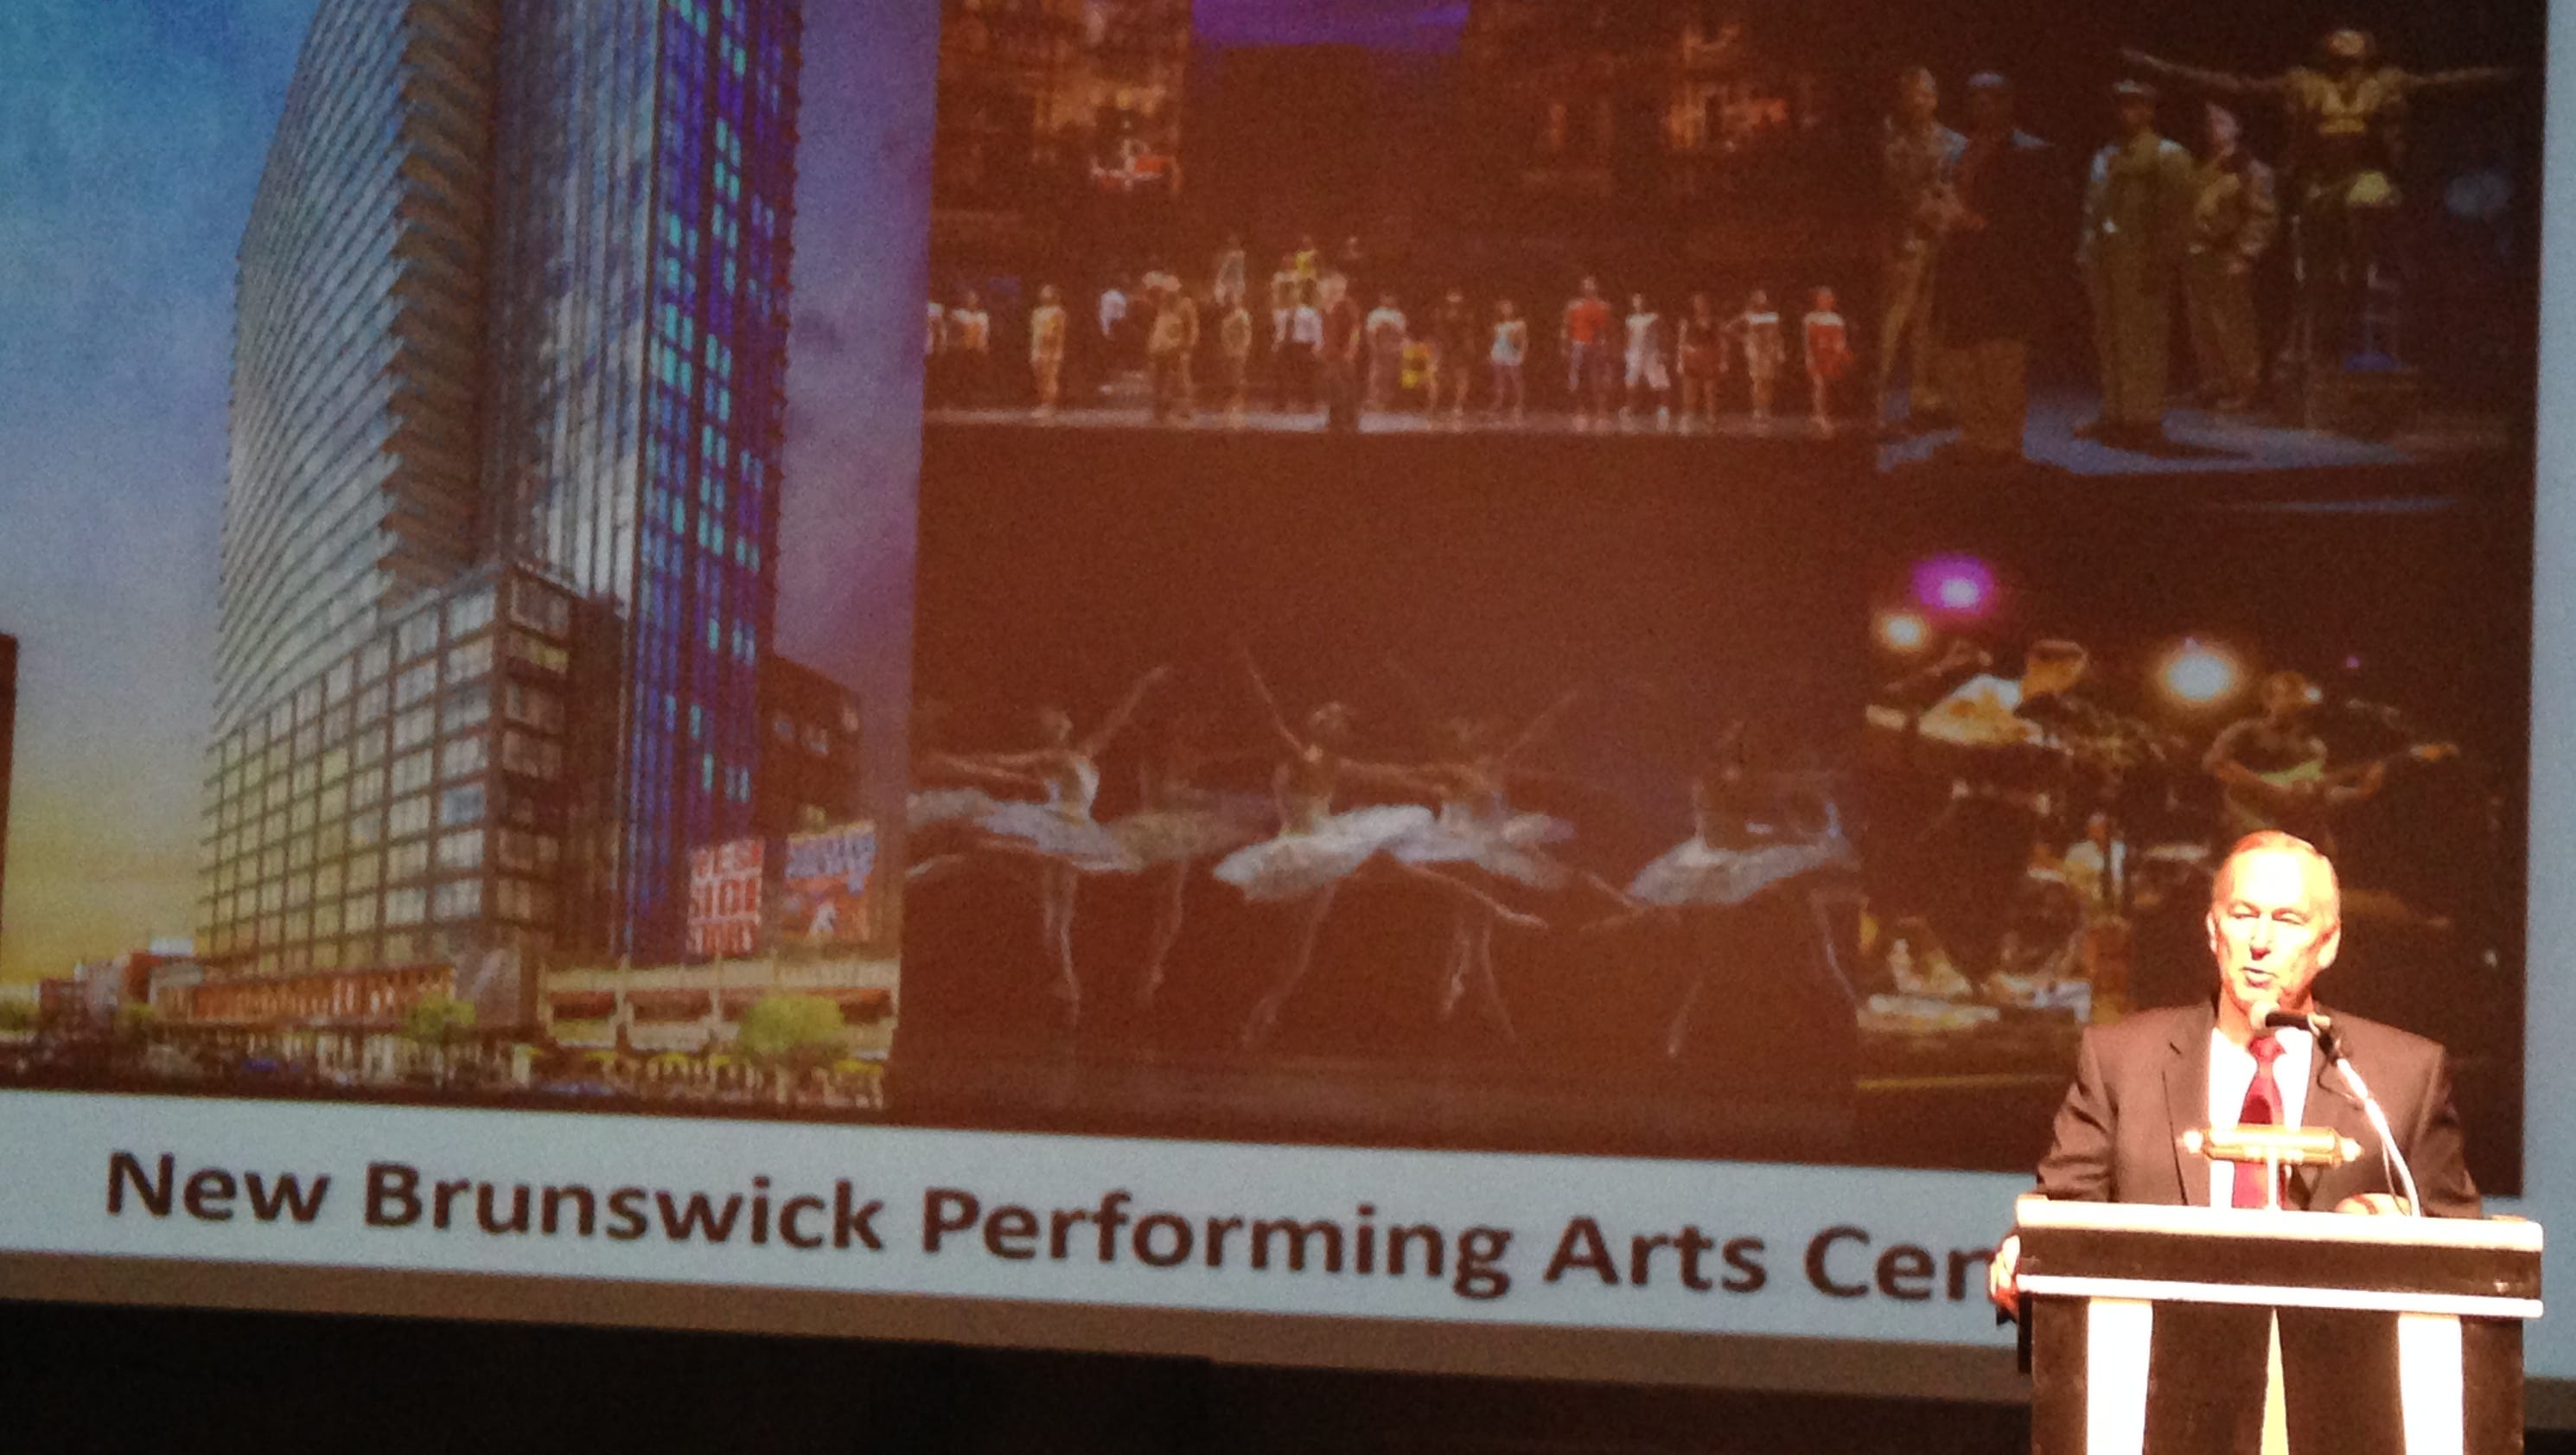 Middlesex County to invest $12M in New Brunswick Performing Arts Center - MyCentralJersey.com